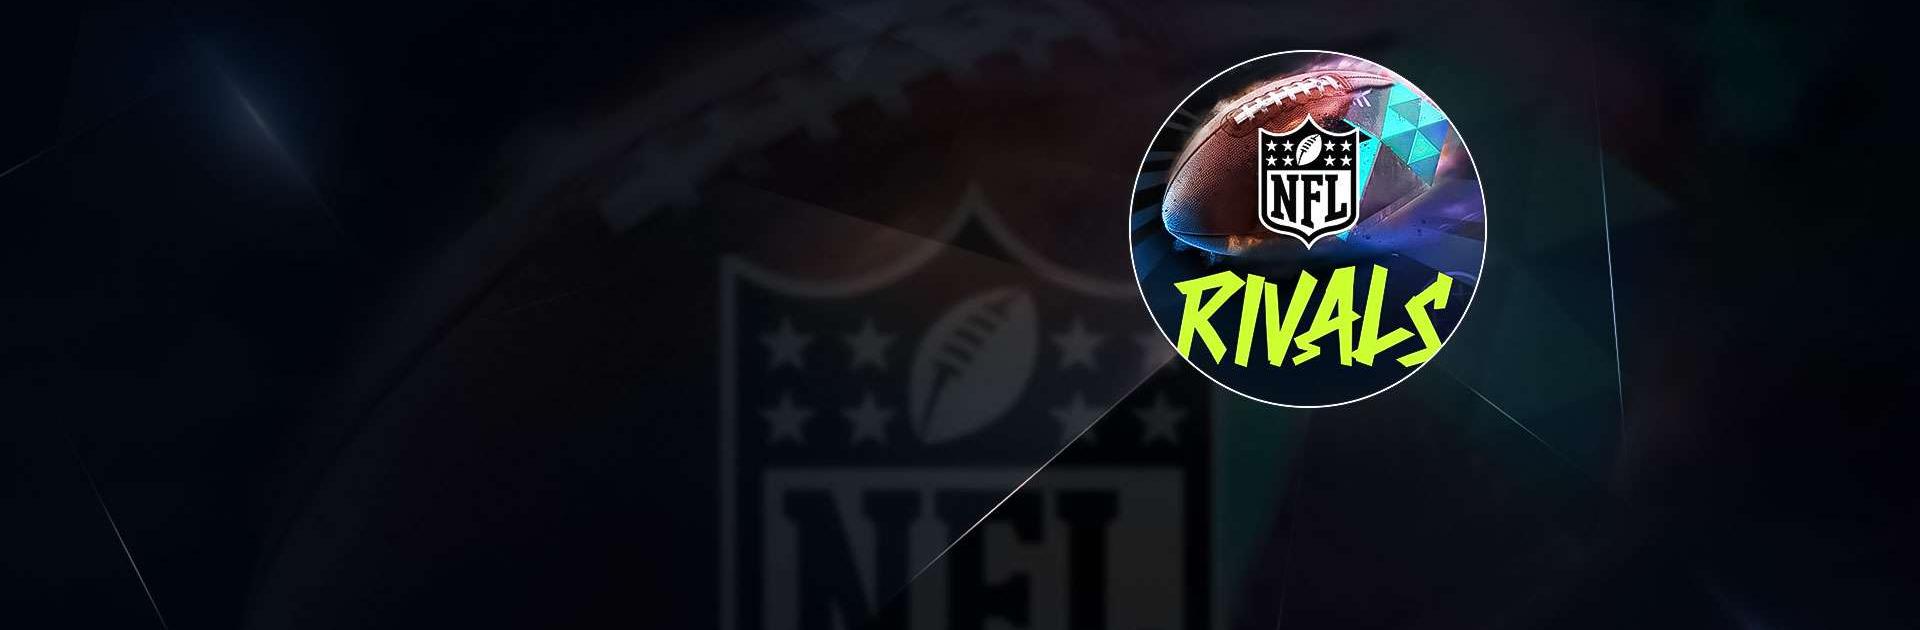 NFL Rivals - Football Manager